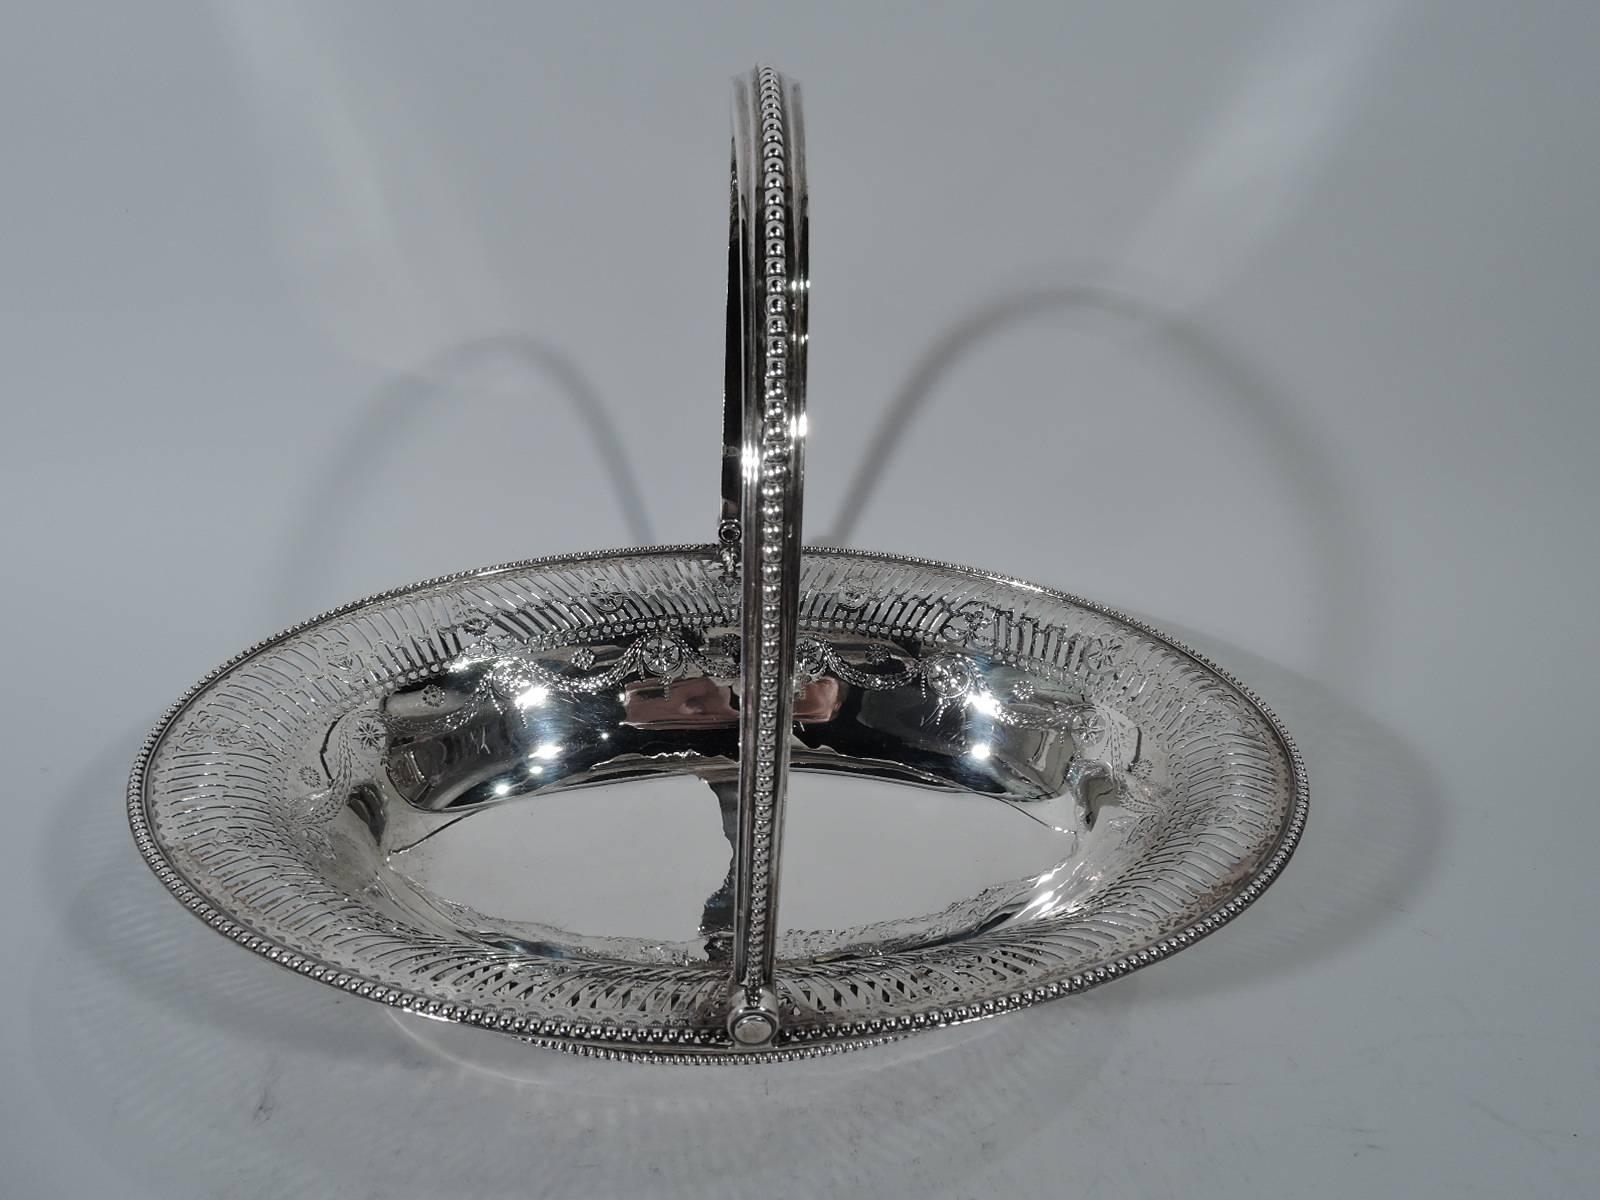 George III sterling silver basket. Made by William Plummer in London in 1782. Oval bowl with swing c-scroll handle and oval foot. Beaded rims and handle, and pierced lines and oval frames inset with vases and flowers. Interior has engraved garland.